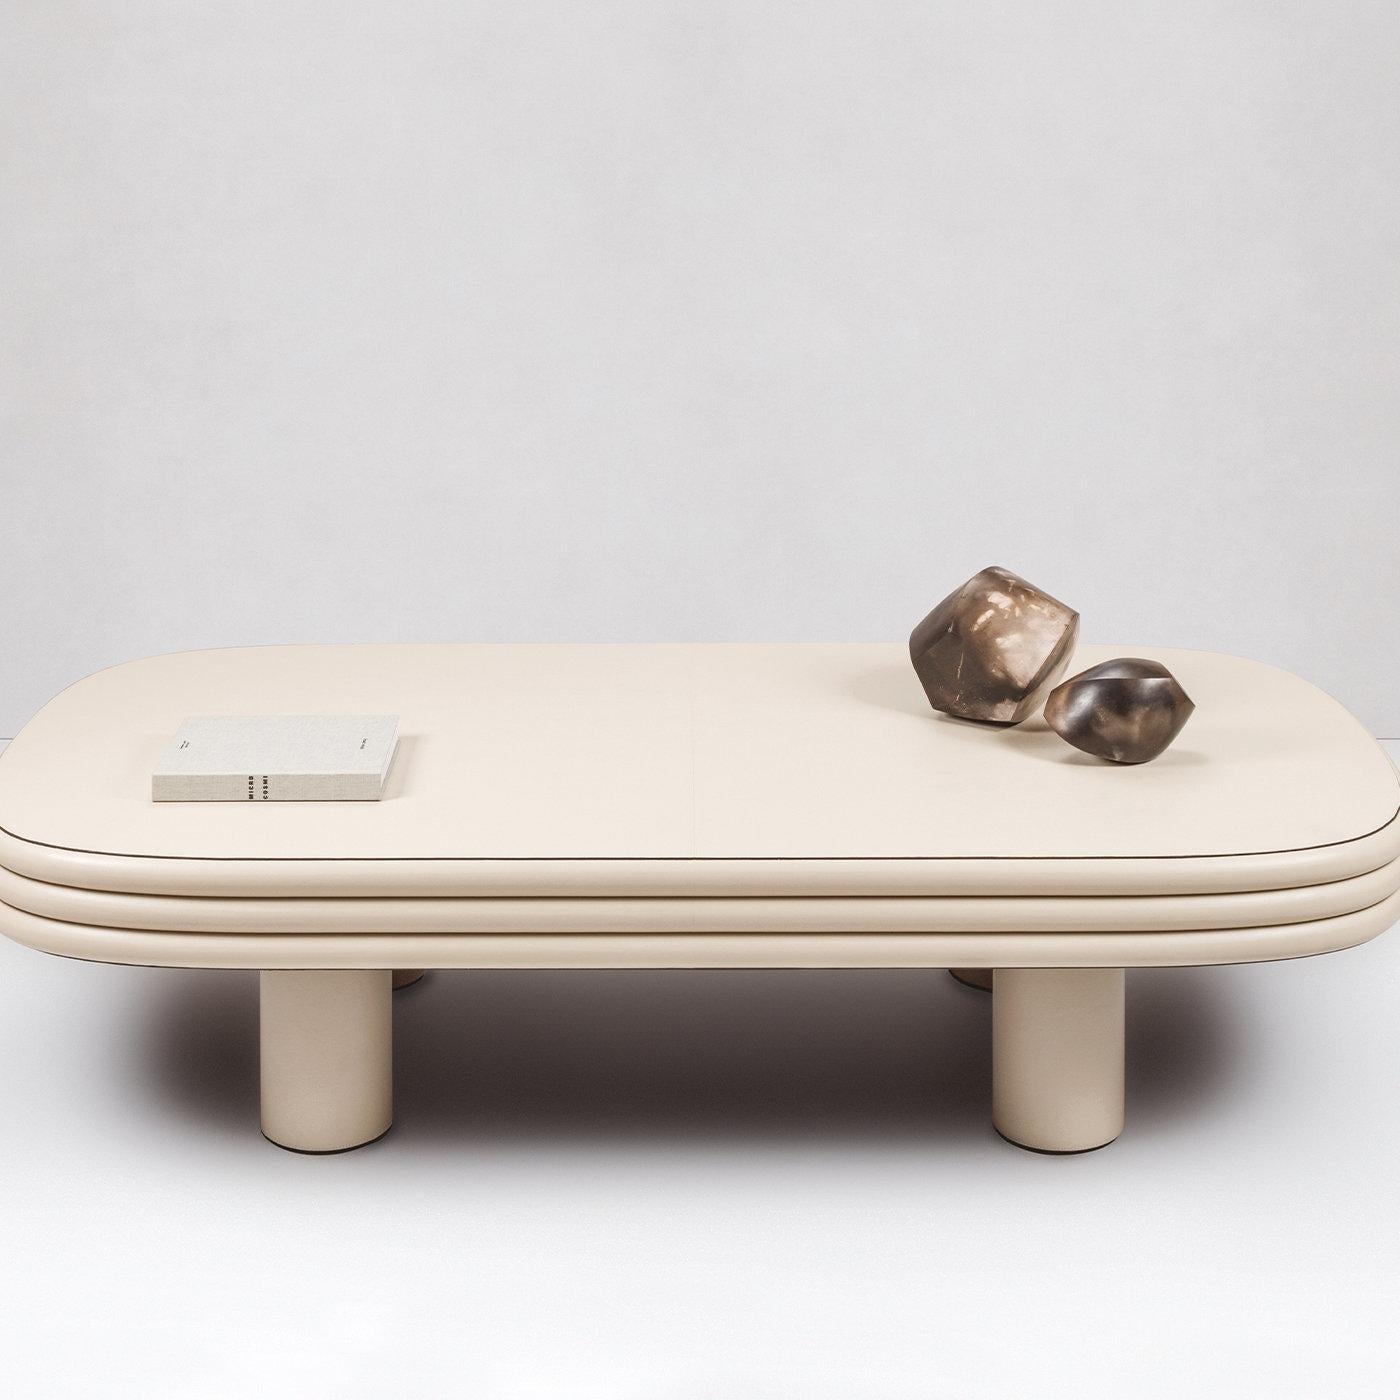 Contemporary leather rectangular coffee table - Scala by Stephane Parmentier for Giobagnara.
The object presented in the image has following finish: F06 Ivory Nappa Leather.

Characterized by a dynamic interplay of shapes, this coffee table